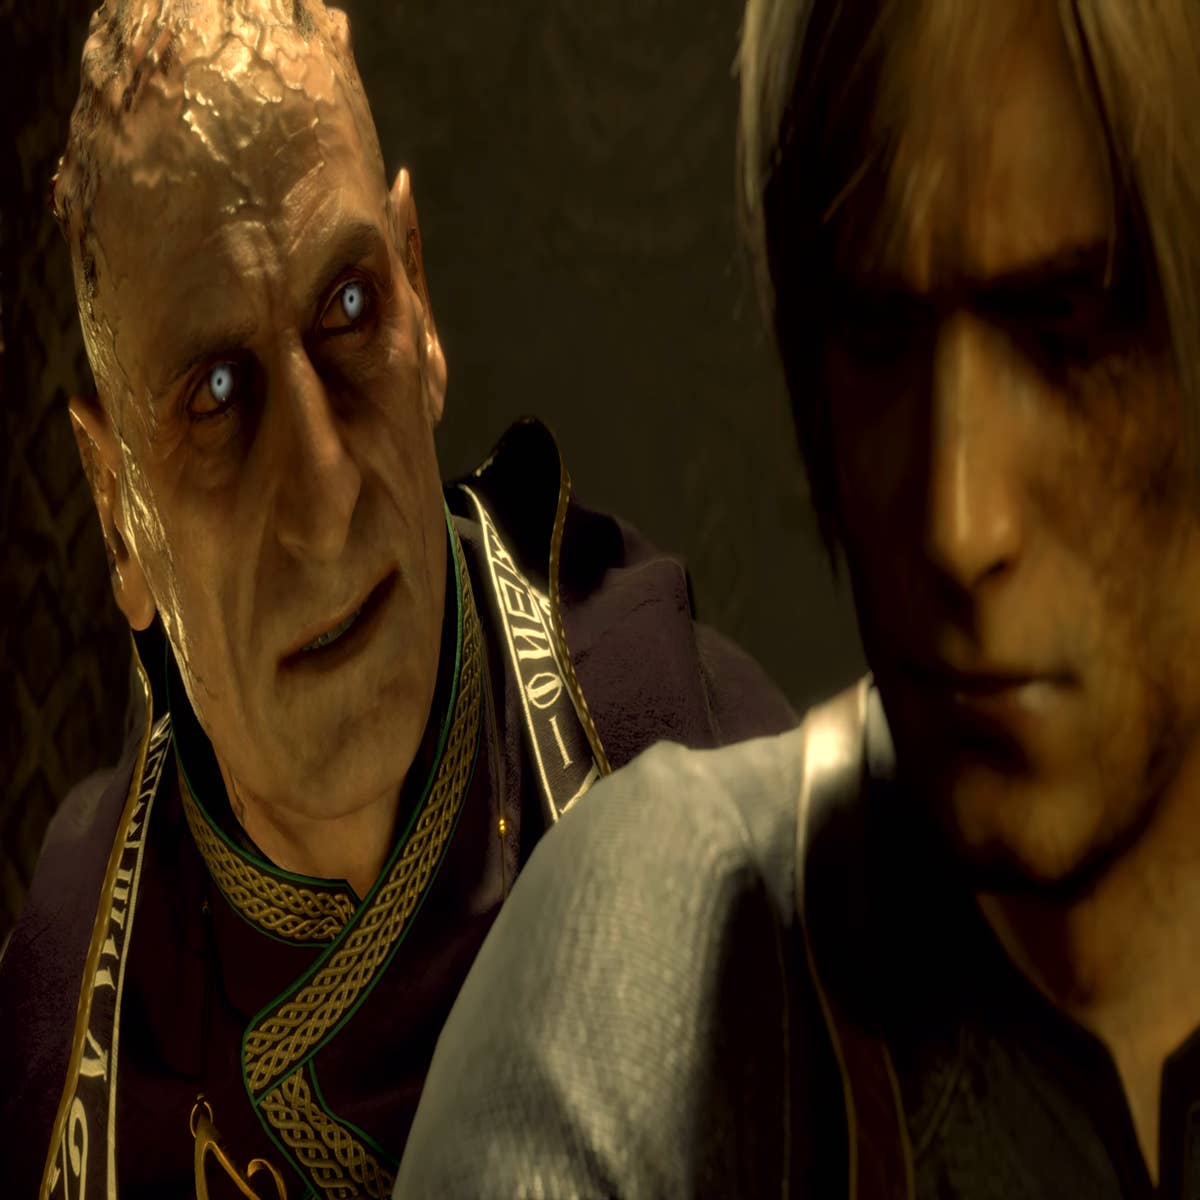 Resident Evil 4 Remake Will Get a PS4 Release